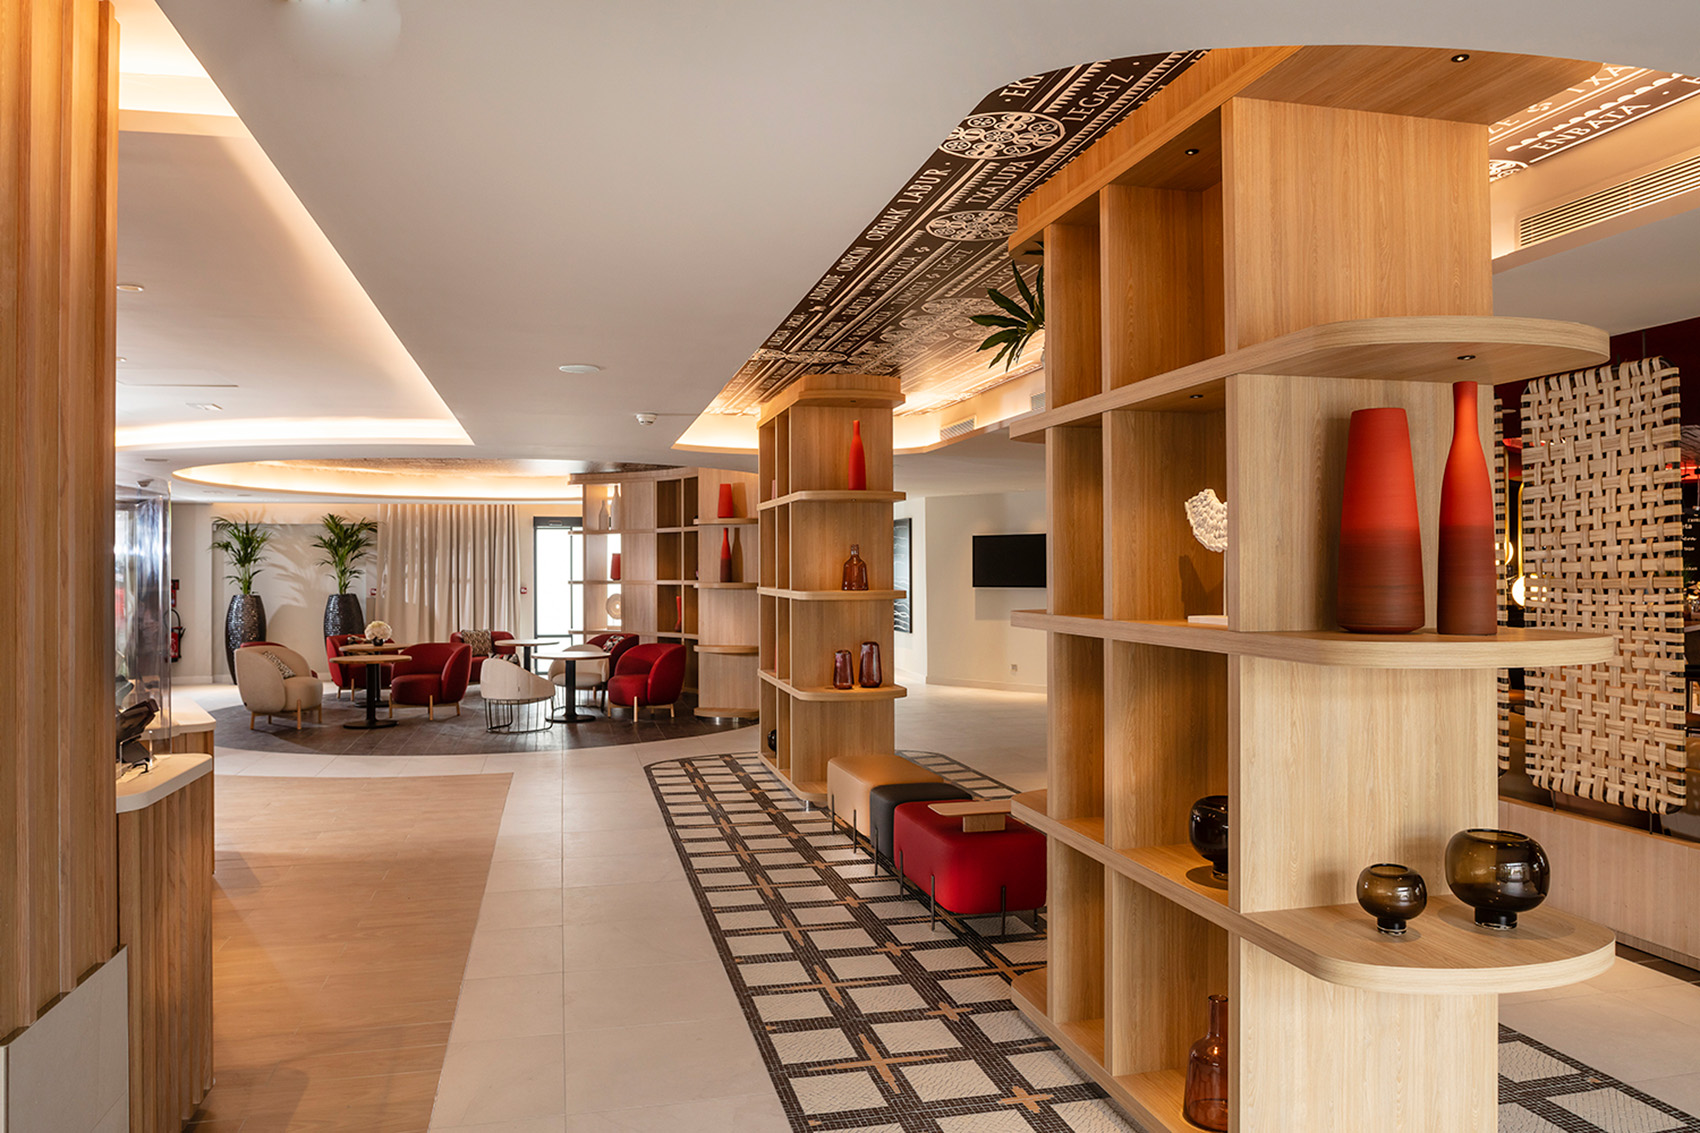 Lobby hall of the helianthal hotel and spa in Saint Jean de Luz, 4 star lifestyle hotel, seaside hotel designed by the interior design studio jean-philippe nuel, decoration basque country, design